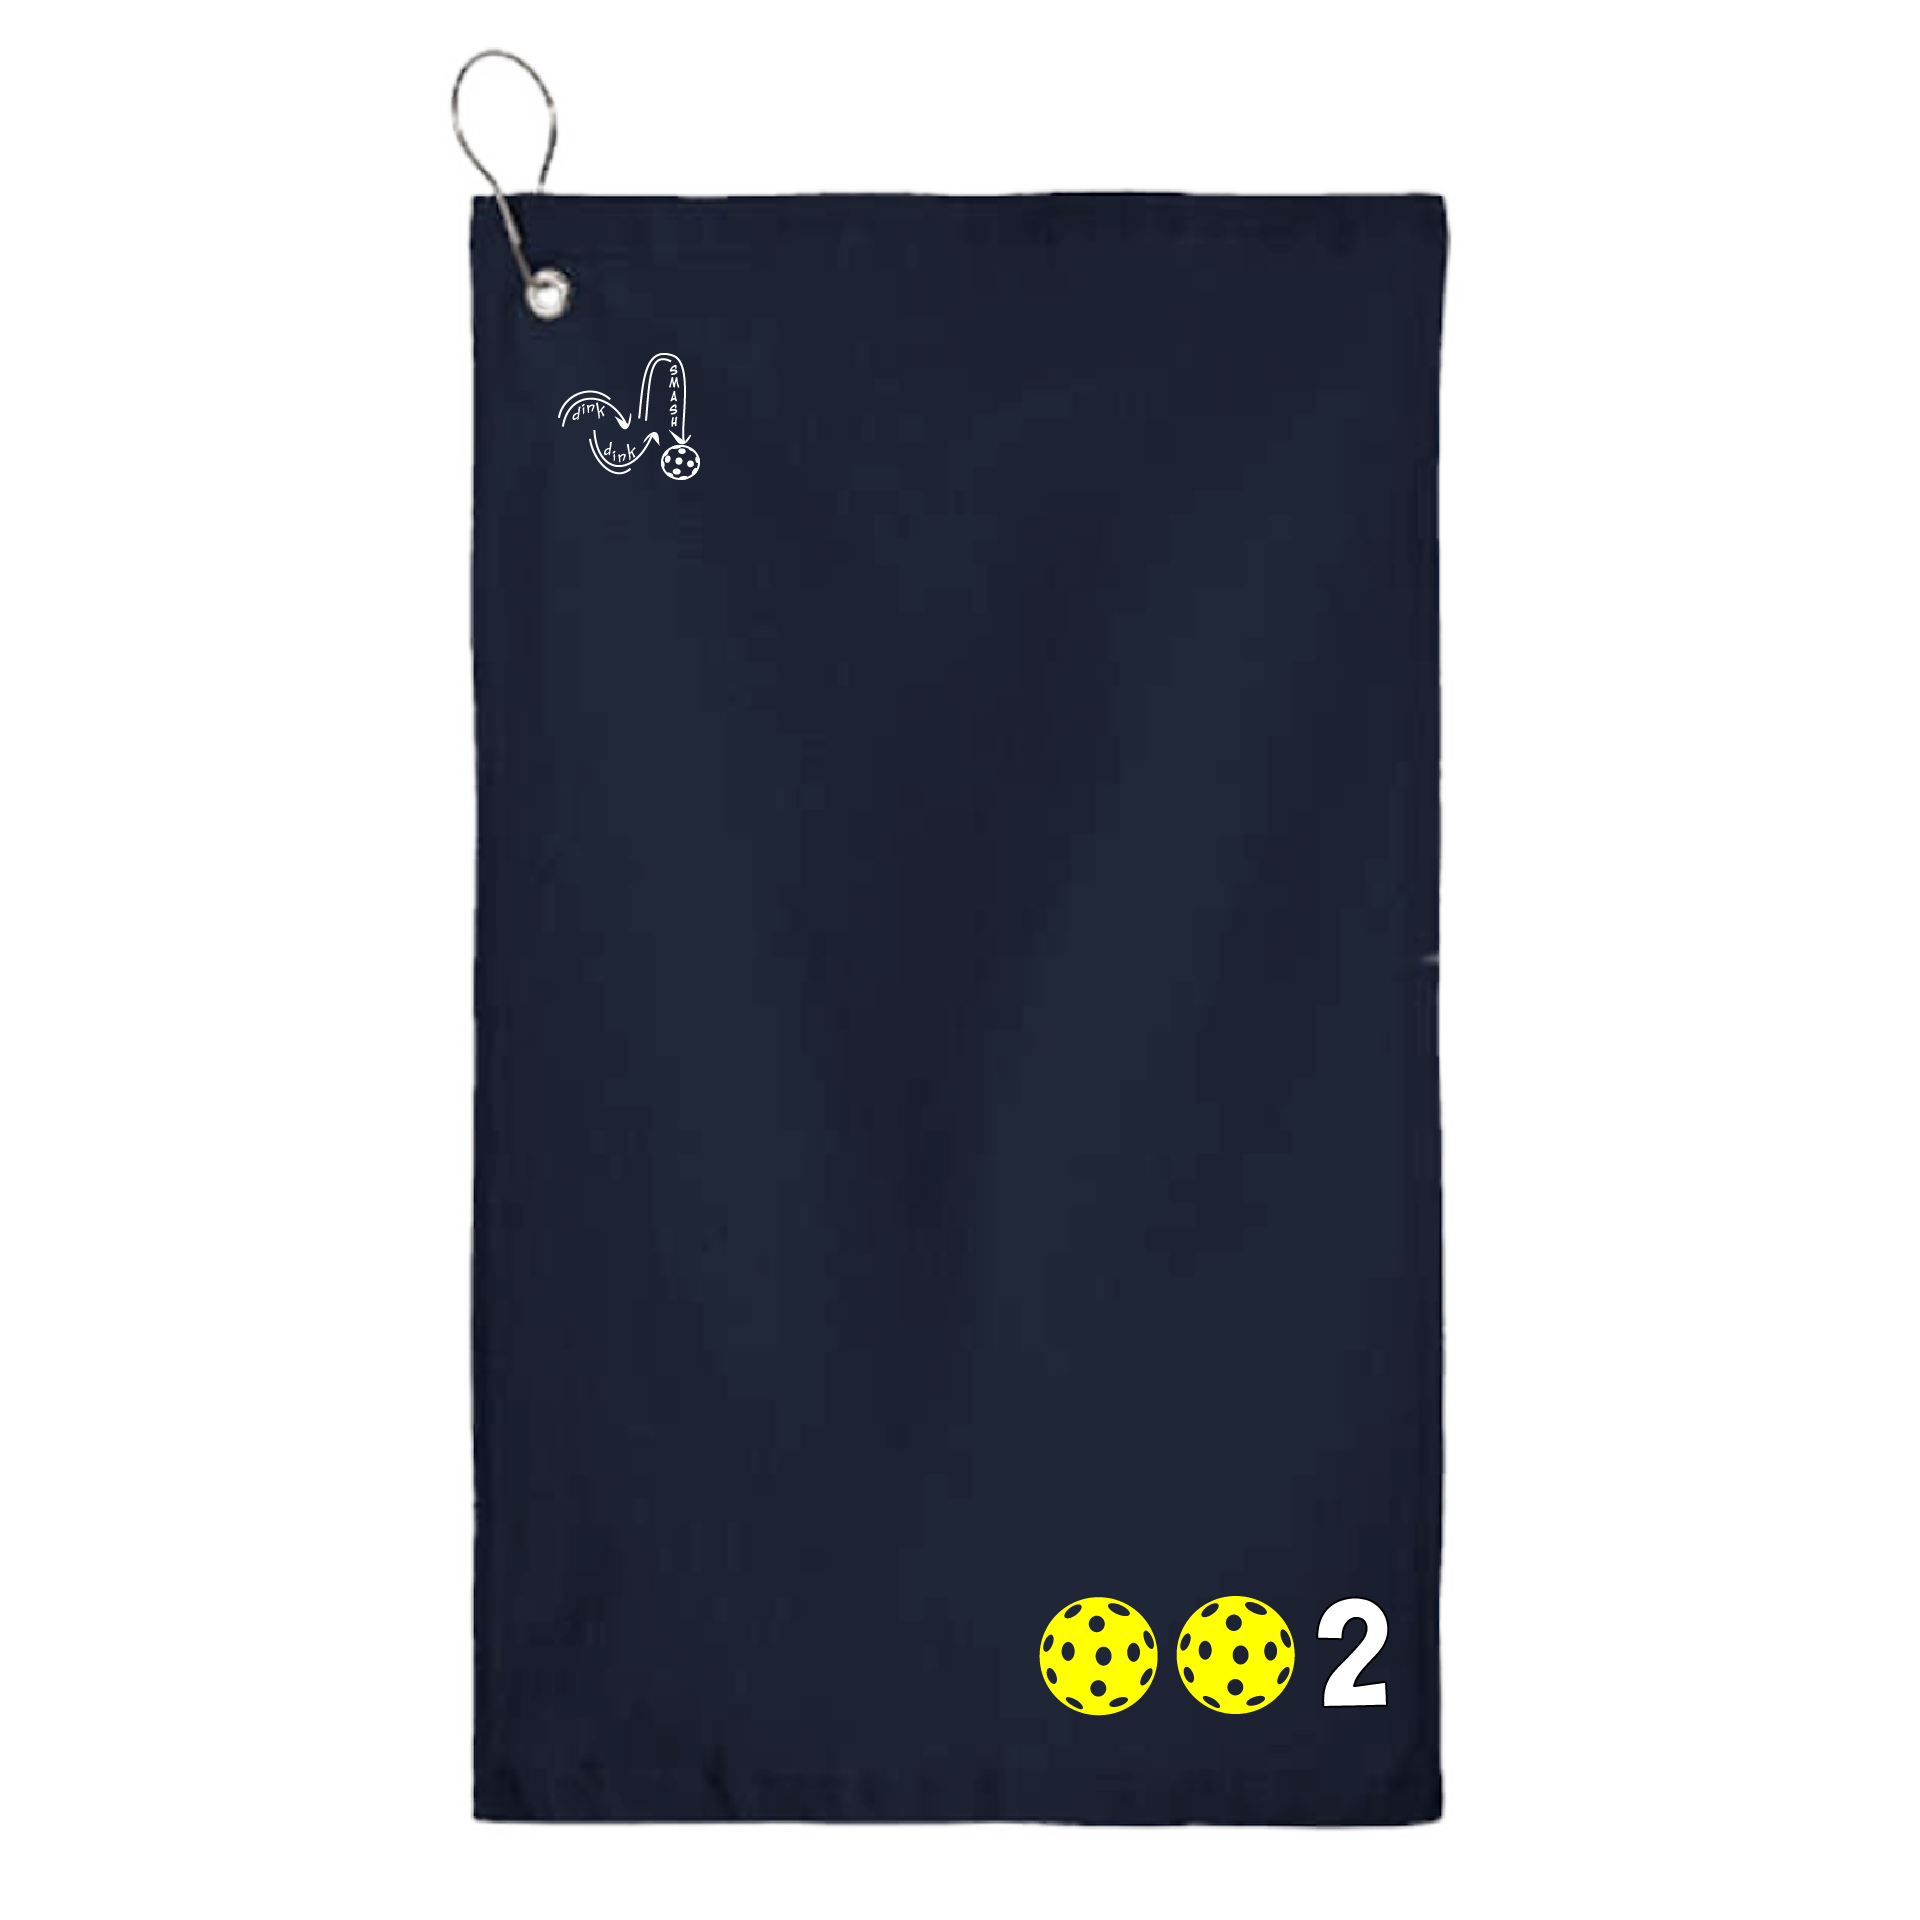 This pickleball towel is crafted with cotton terry velour for optimal performance. It features grommets, hooks, and hemmed edges for added durability. It's perfect for completing your pickleball gear, and an ideal gift for friends and tournaments. The towel is designed to be both absorbent and lightweight, so you can remain dry and comfortable while you play